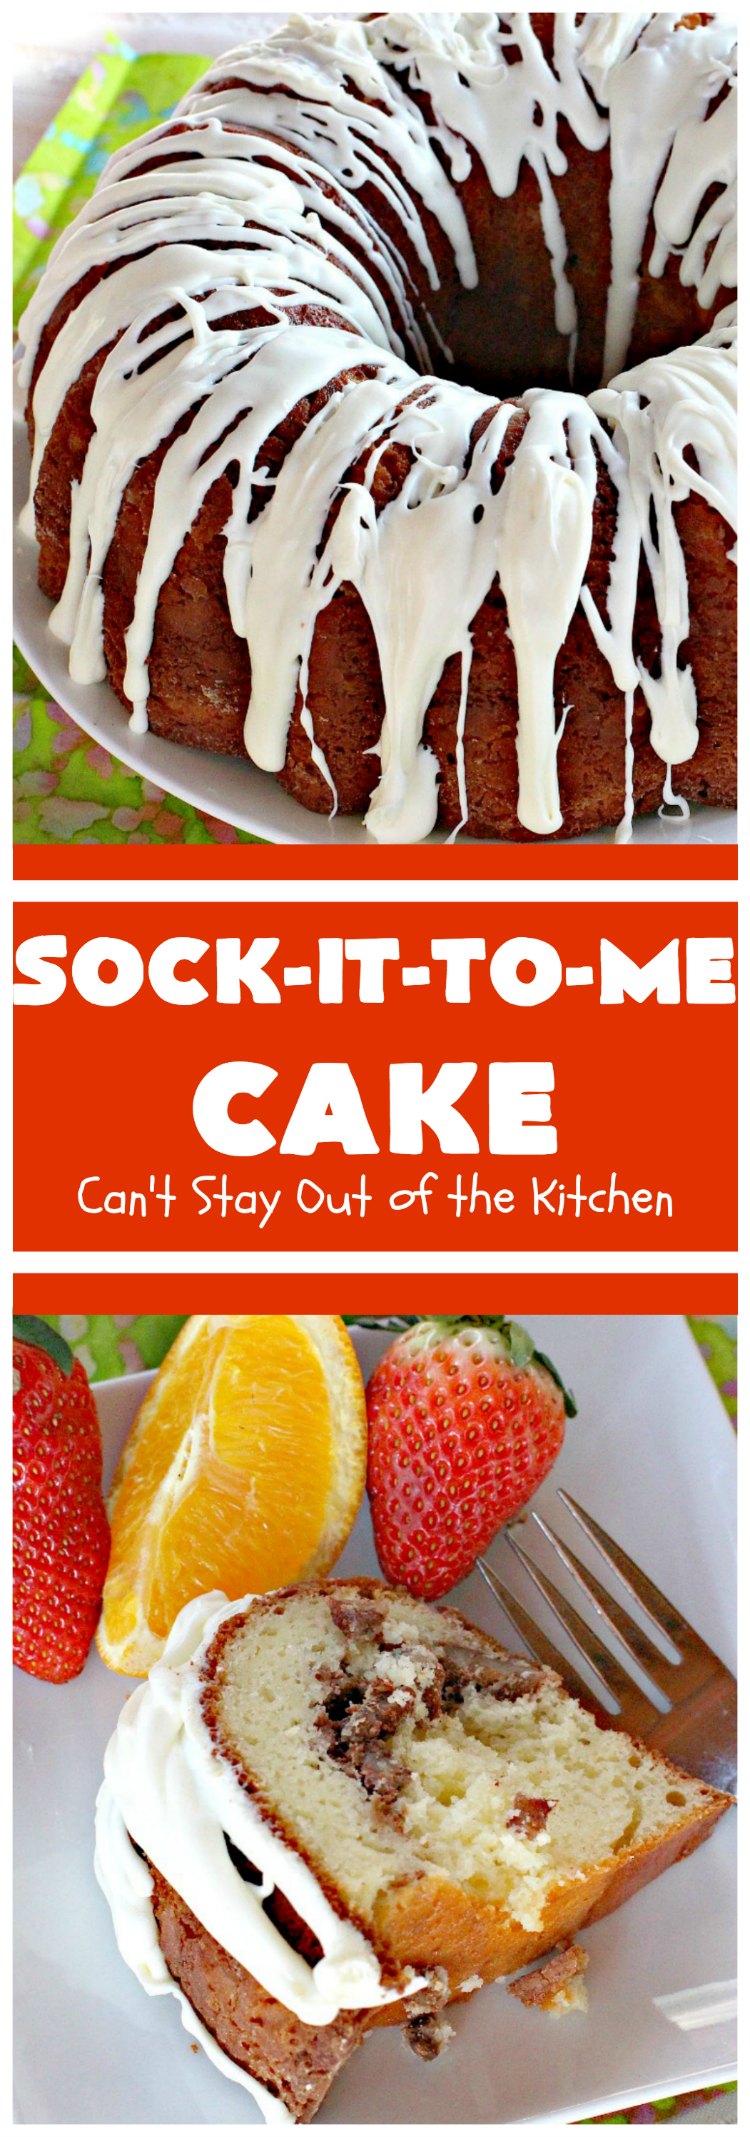 Sock-It-To-Me Cake | Can't Stay Out of the Kitchen